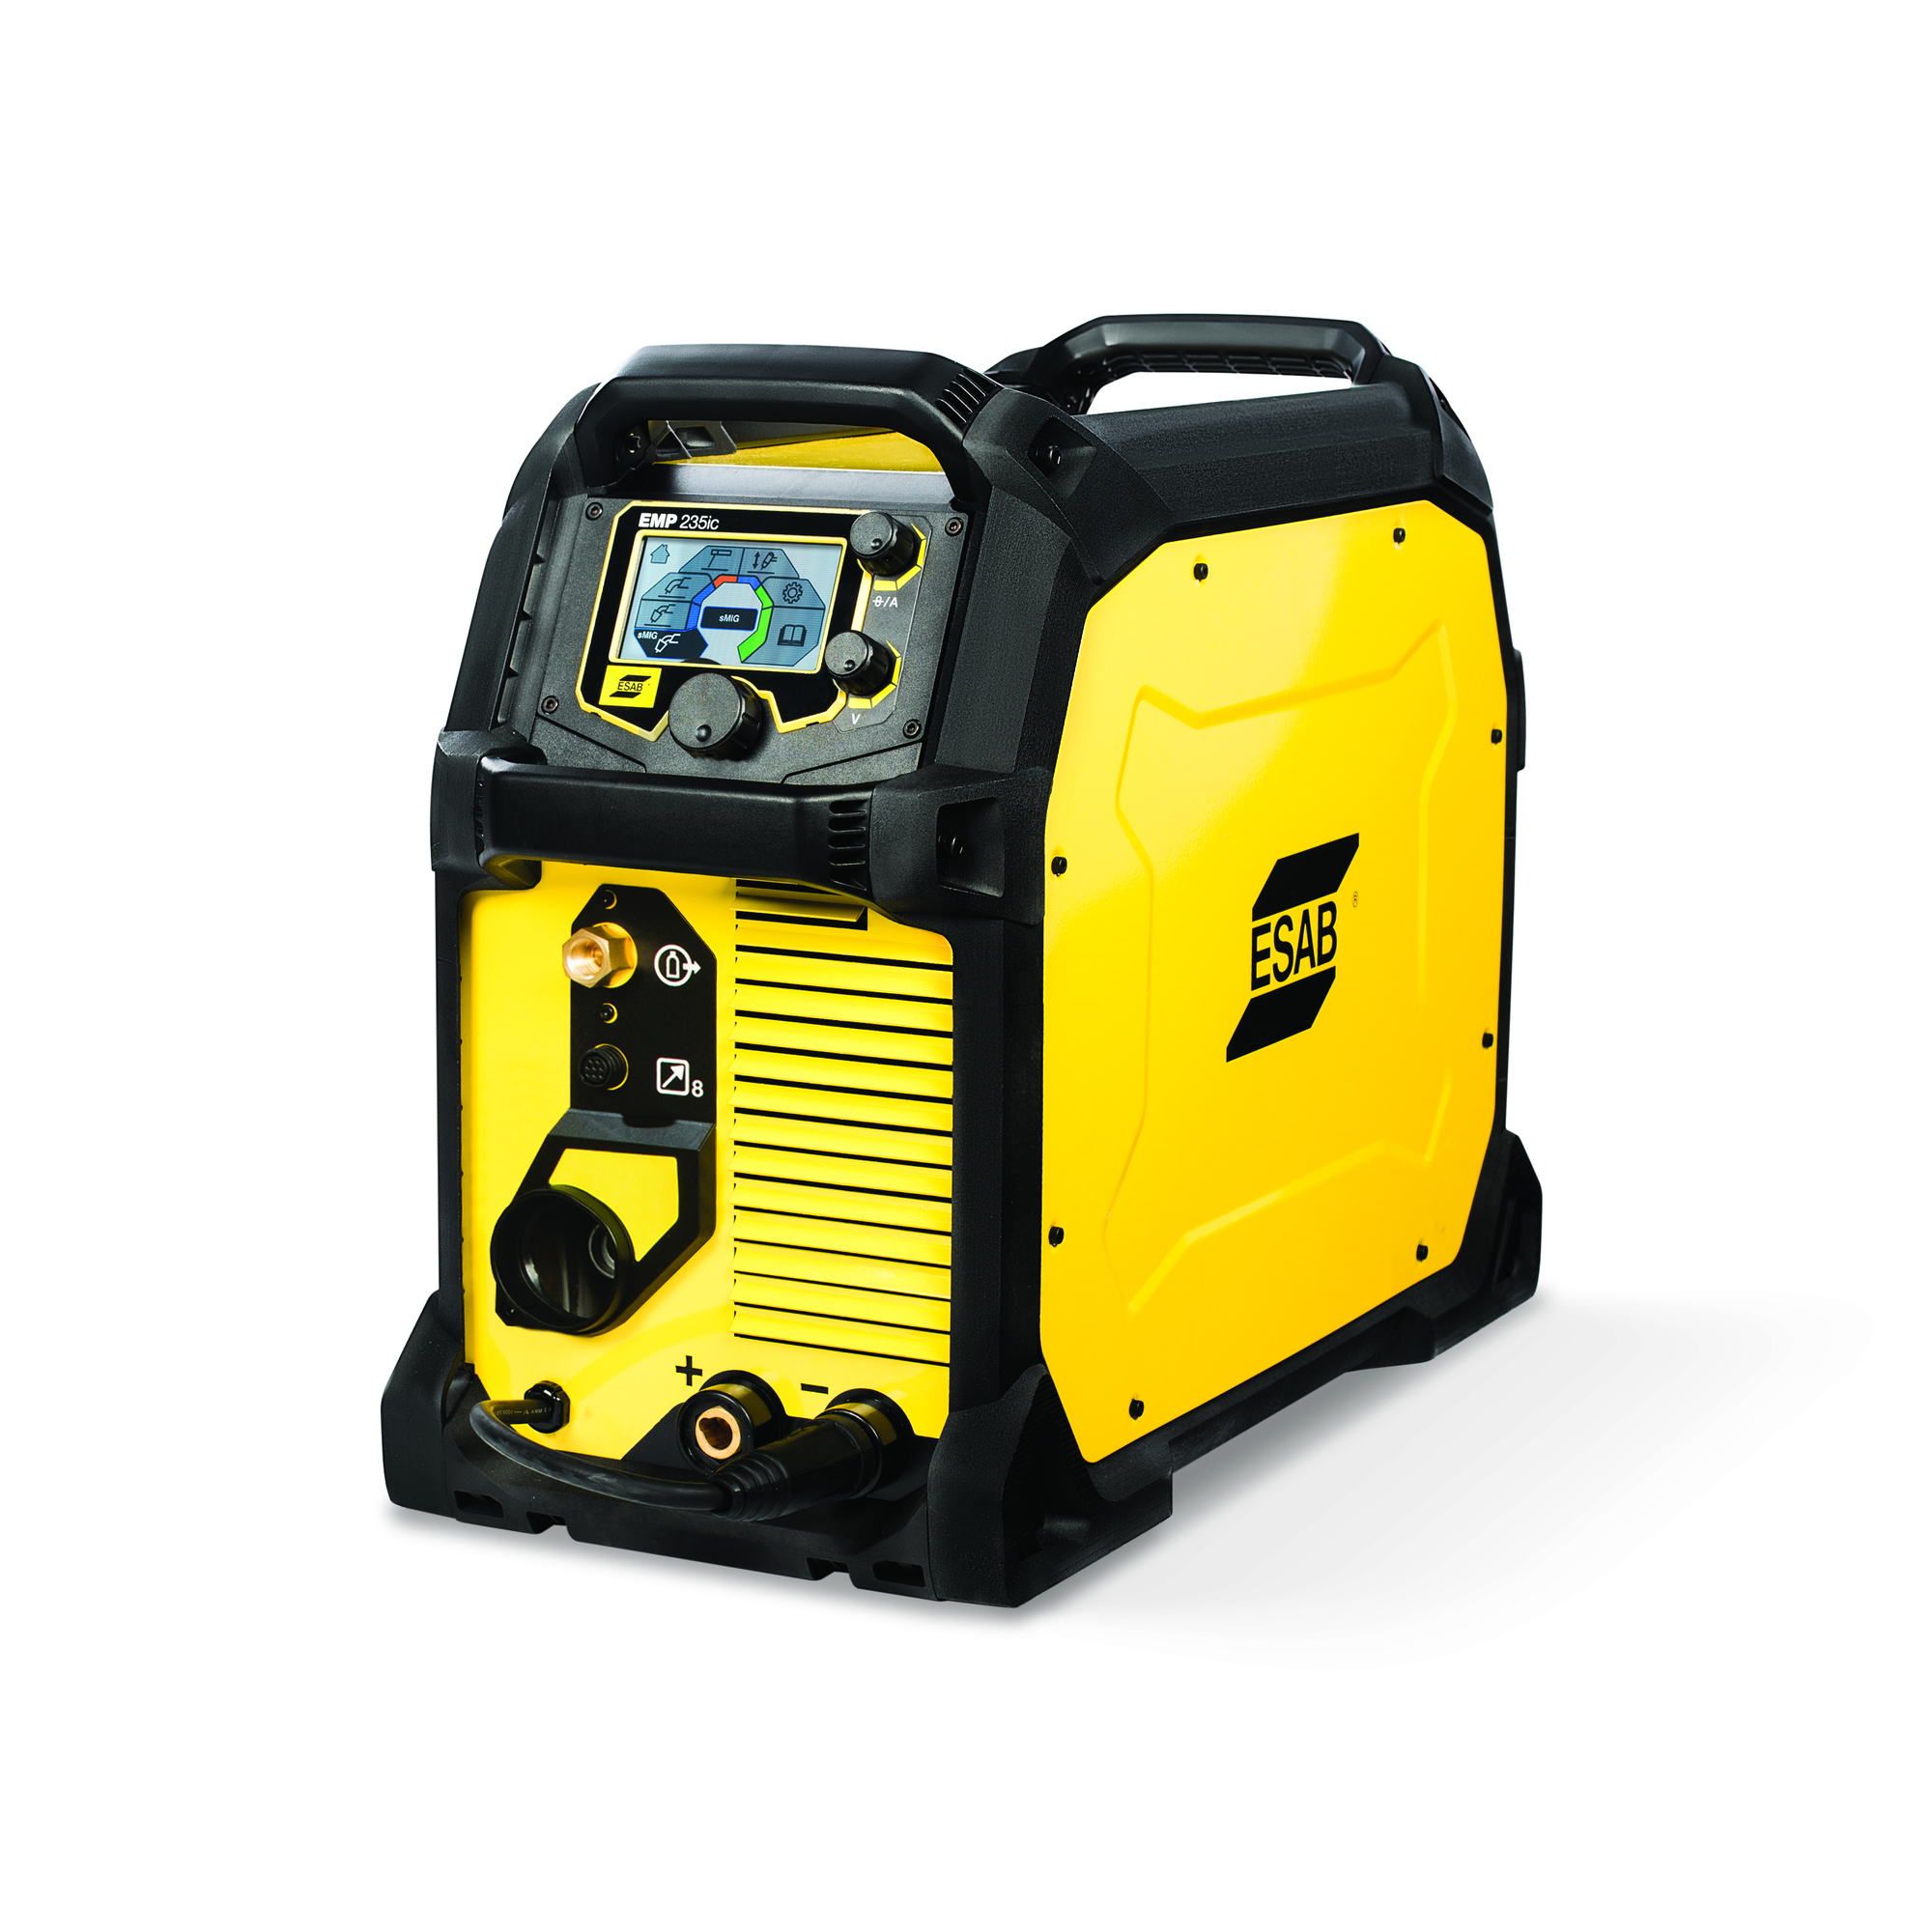 ESAB, Rebel EMP 235ic Multi-Process Welder with Cart, Volts 120/230 Max. Amps 250 Mig Ready, Model 0558012704